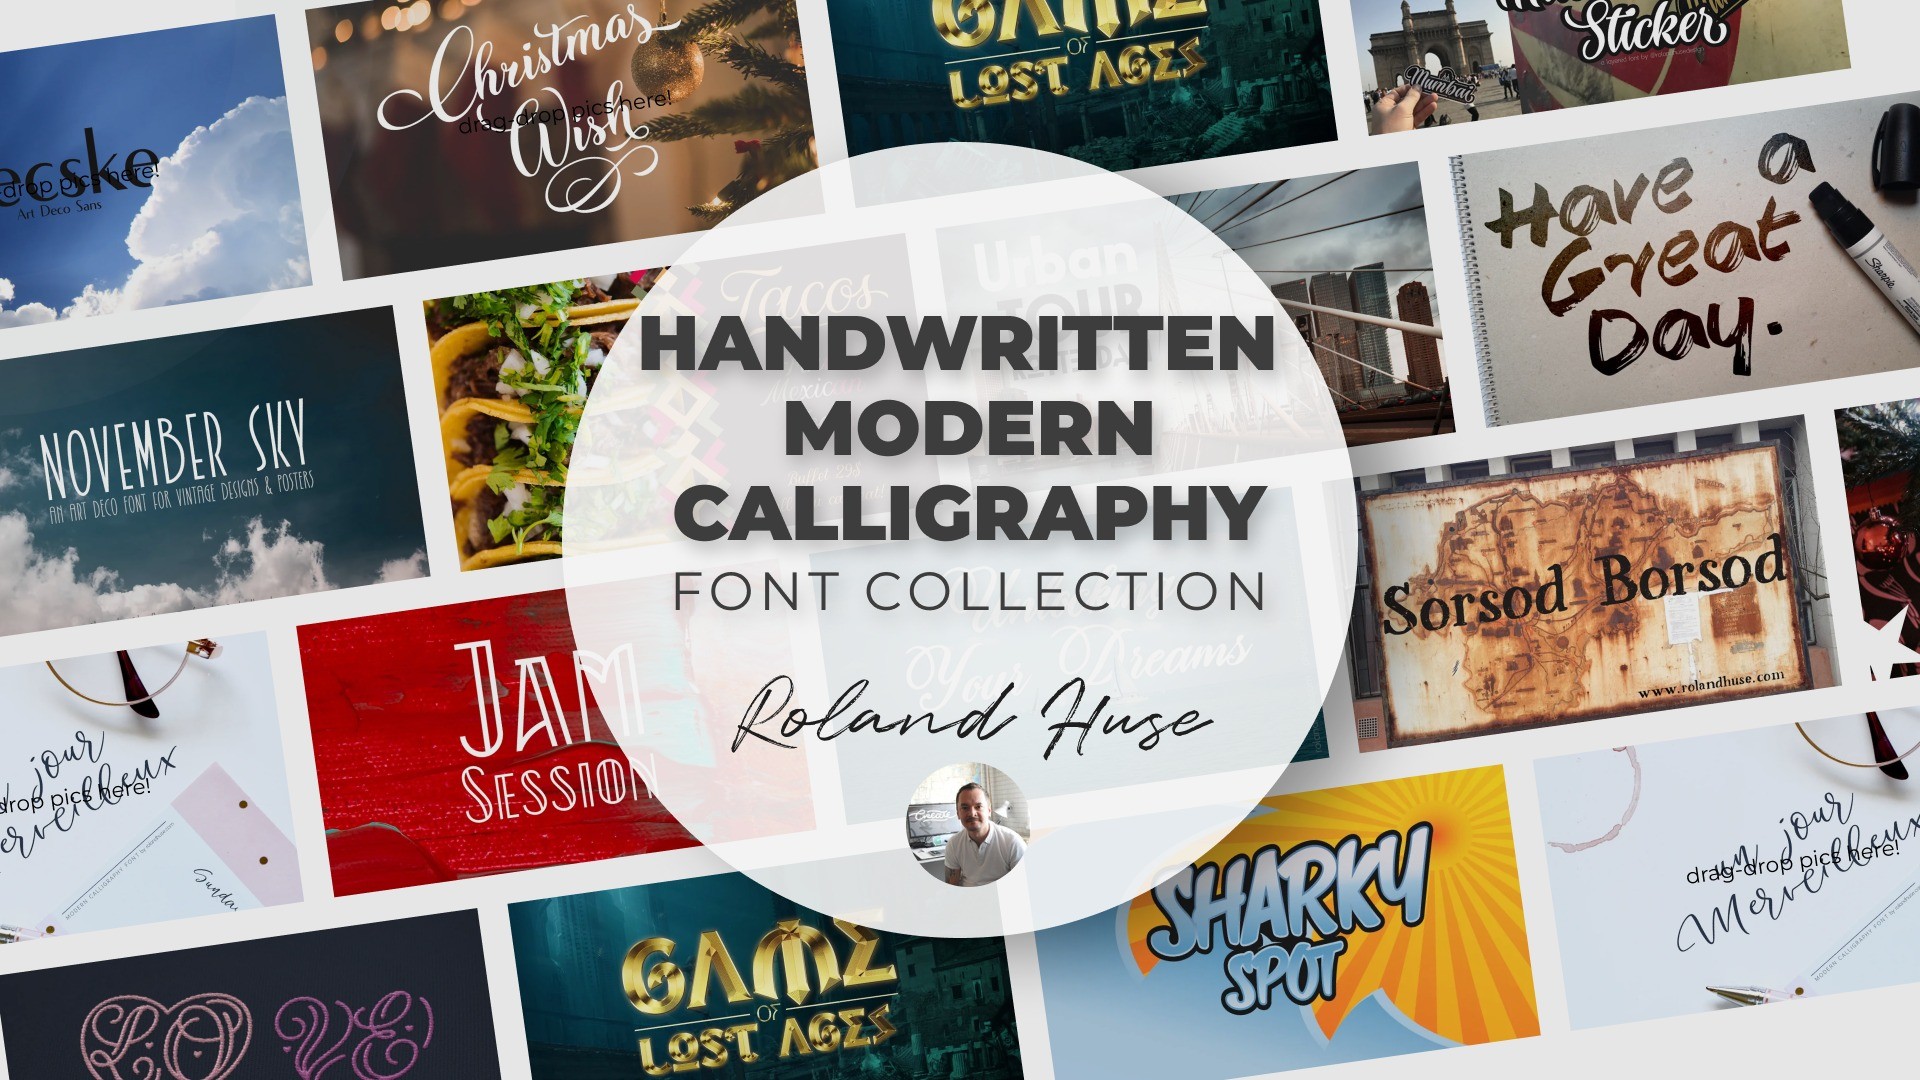 Roland Huse Handwritten Modern Calligraphy Font Collection | AppSumo